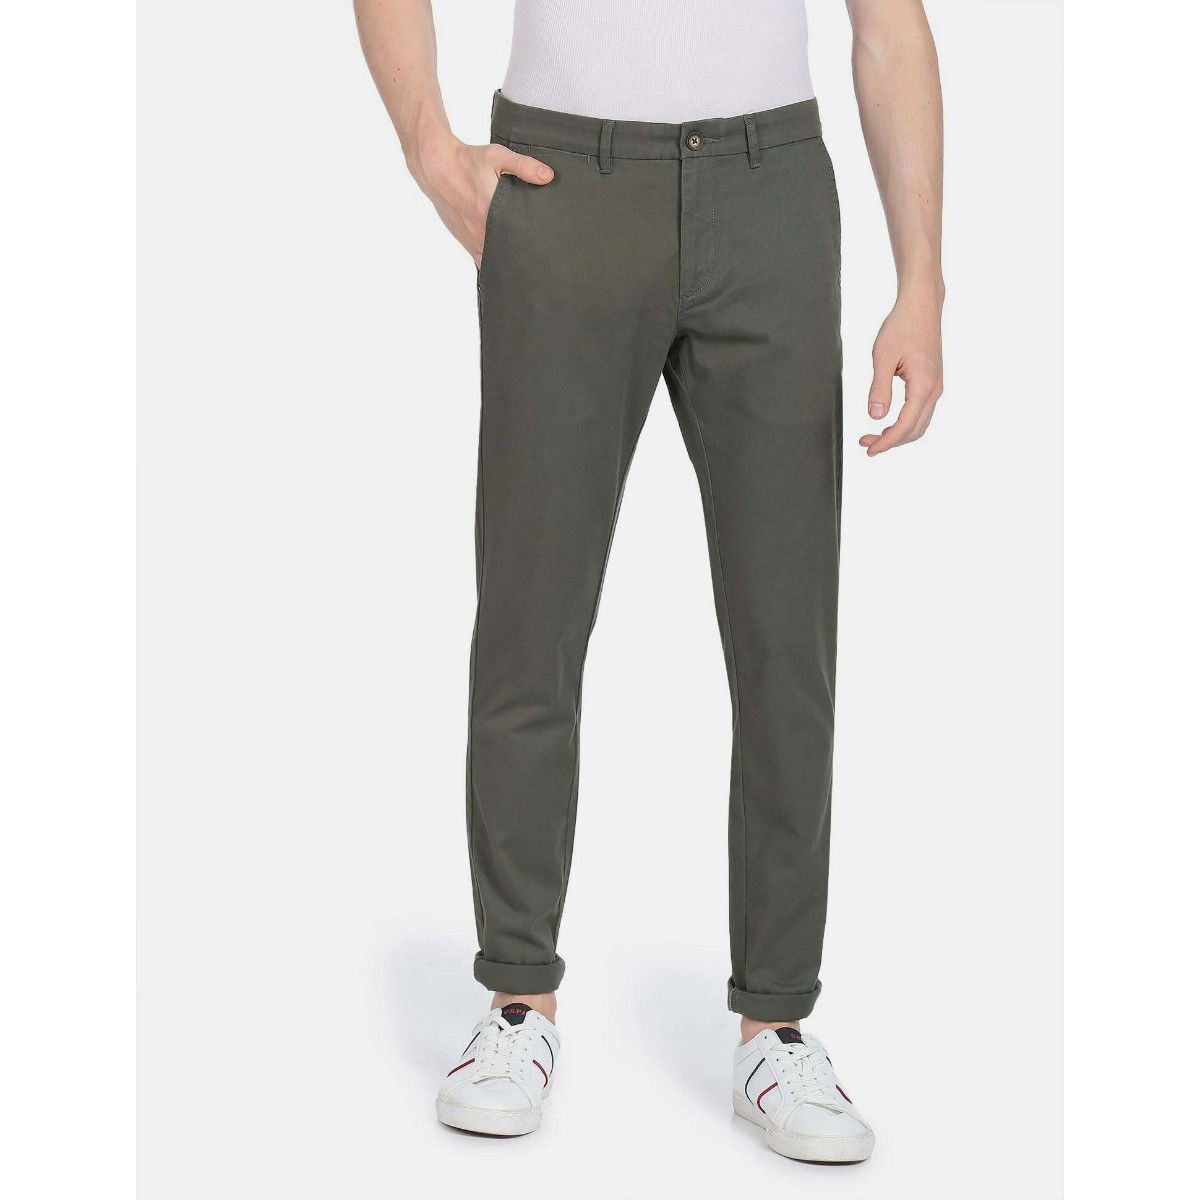 Buy US Polo Assn Flat Front Slim Fit Trousers Online at Low Prices in  India  Paytmmallcom